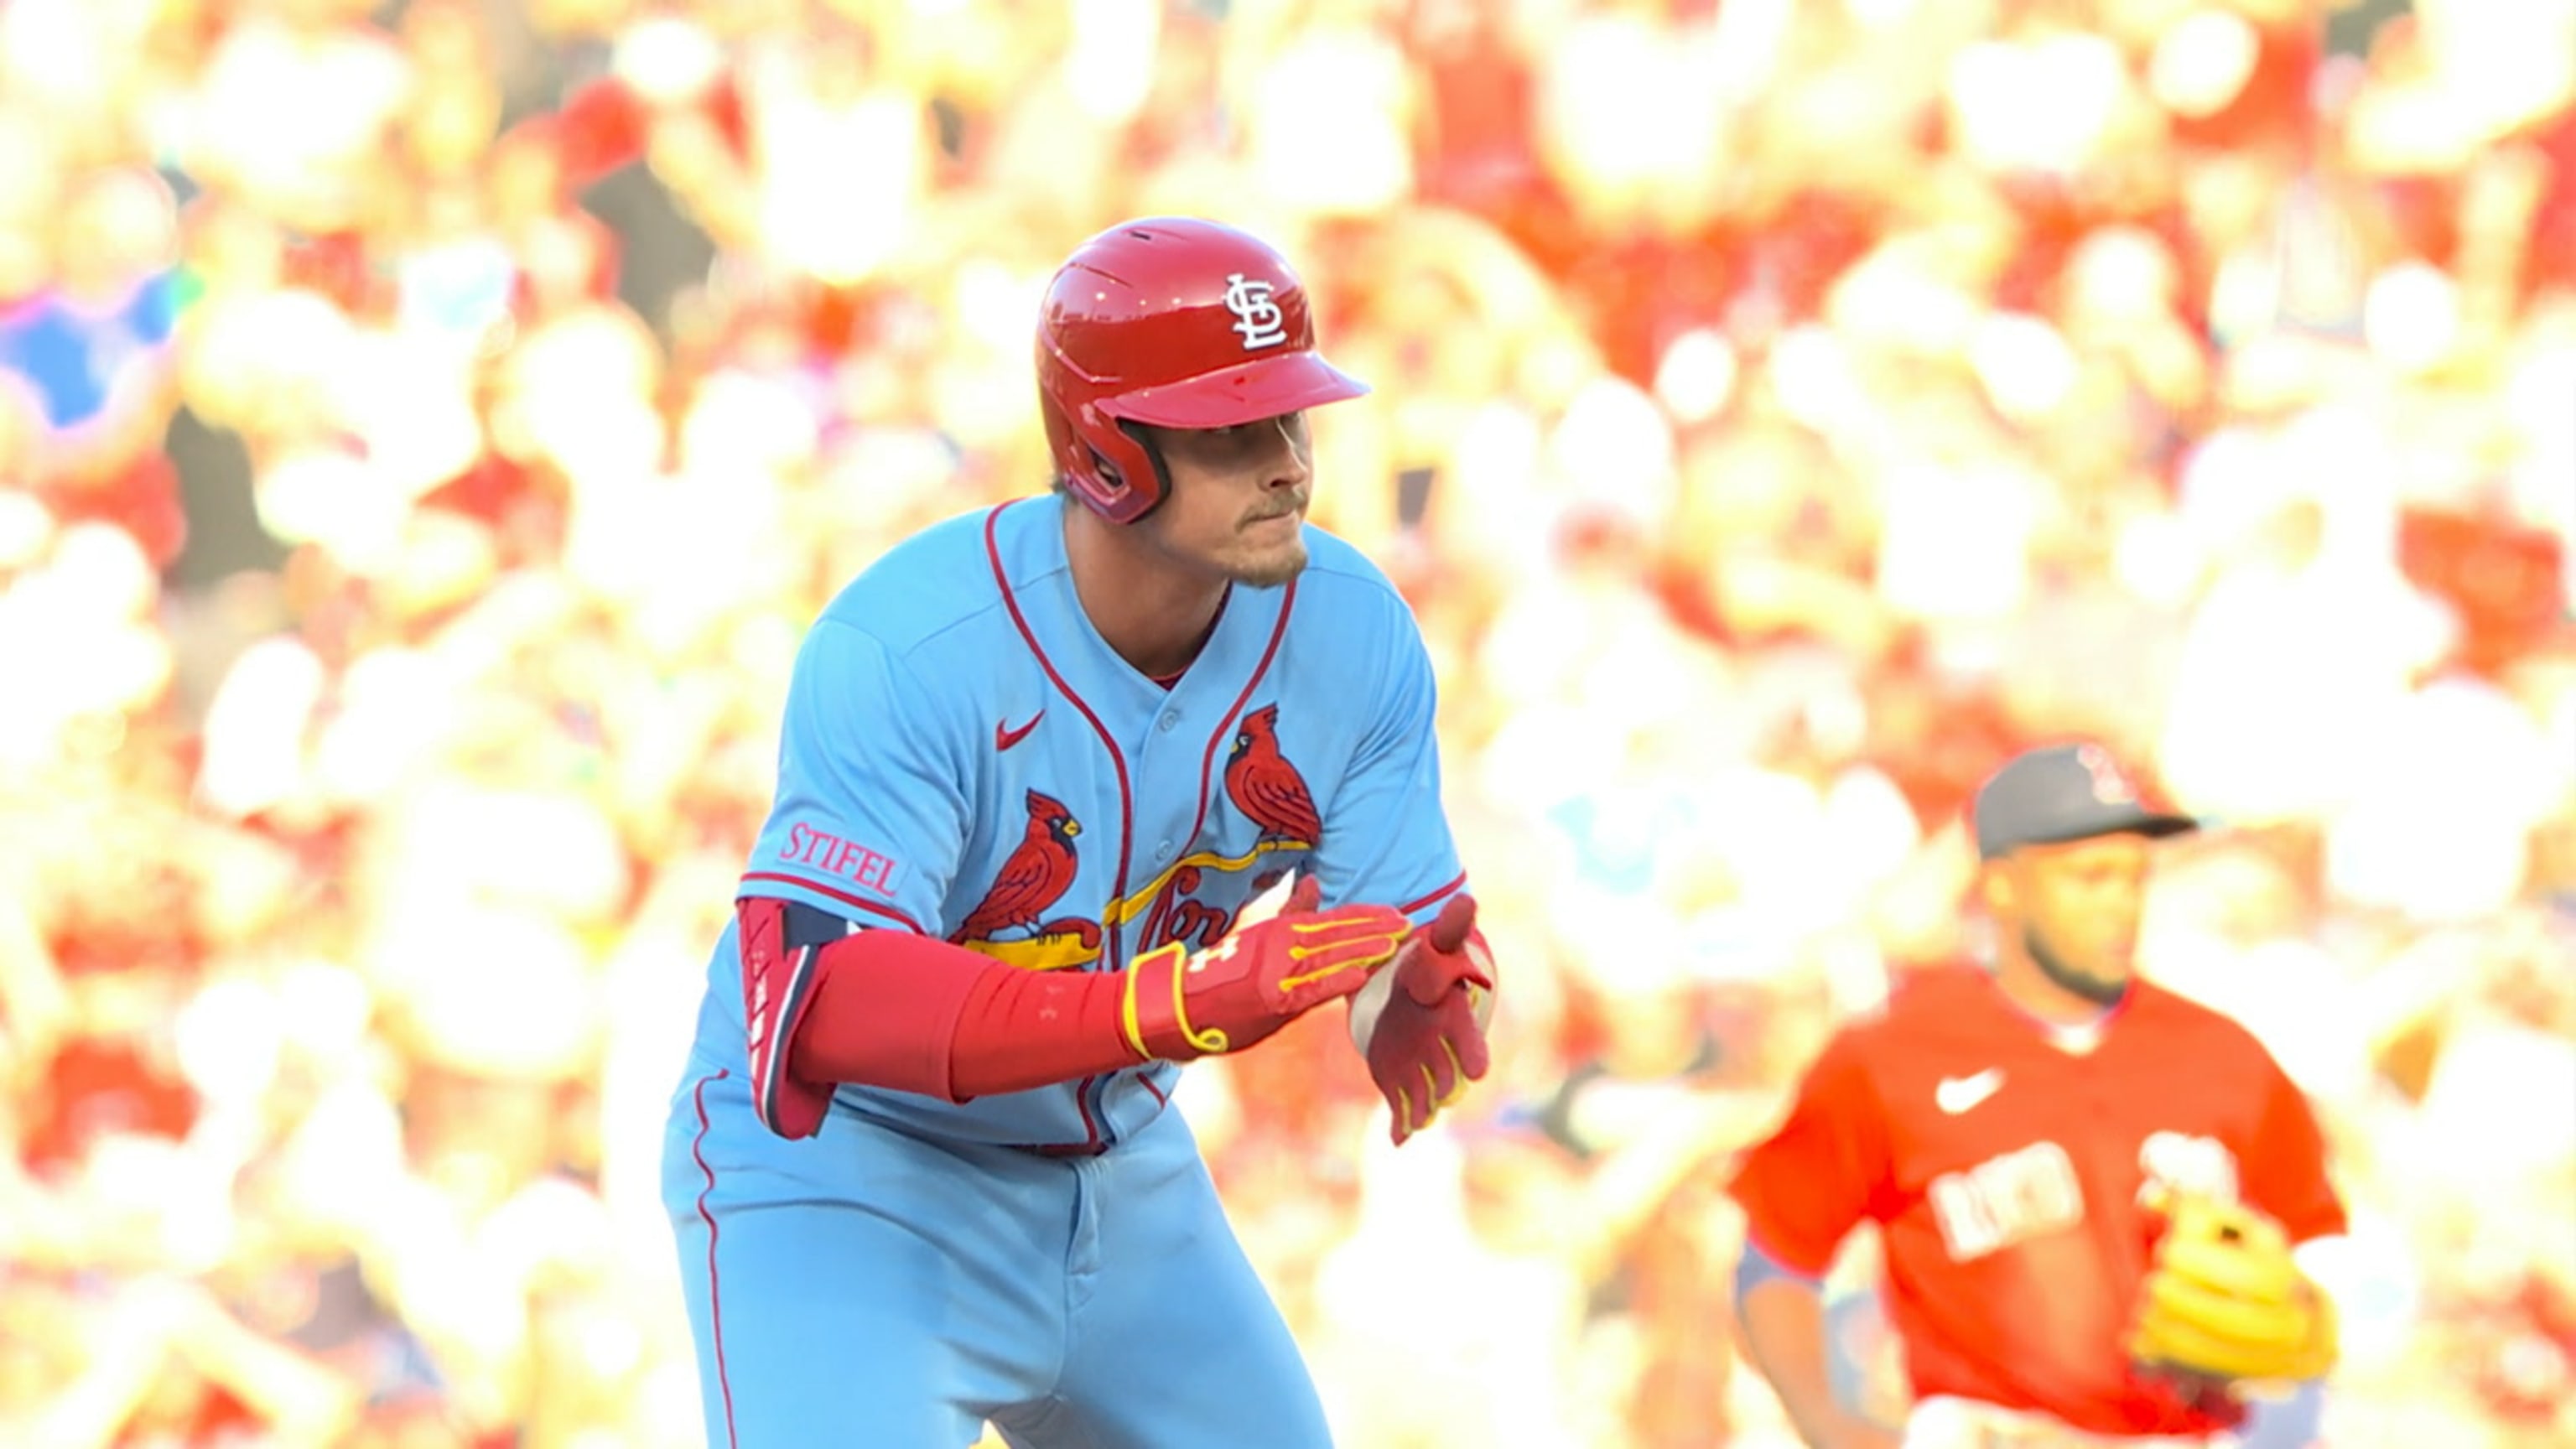 Contreras' edge already on display in the early days of Cardinals camp